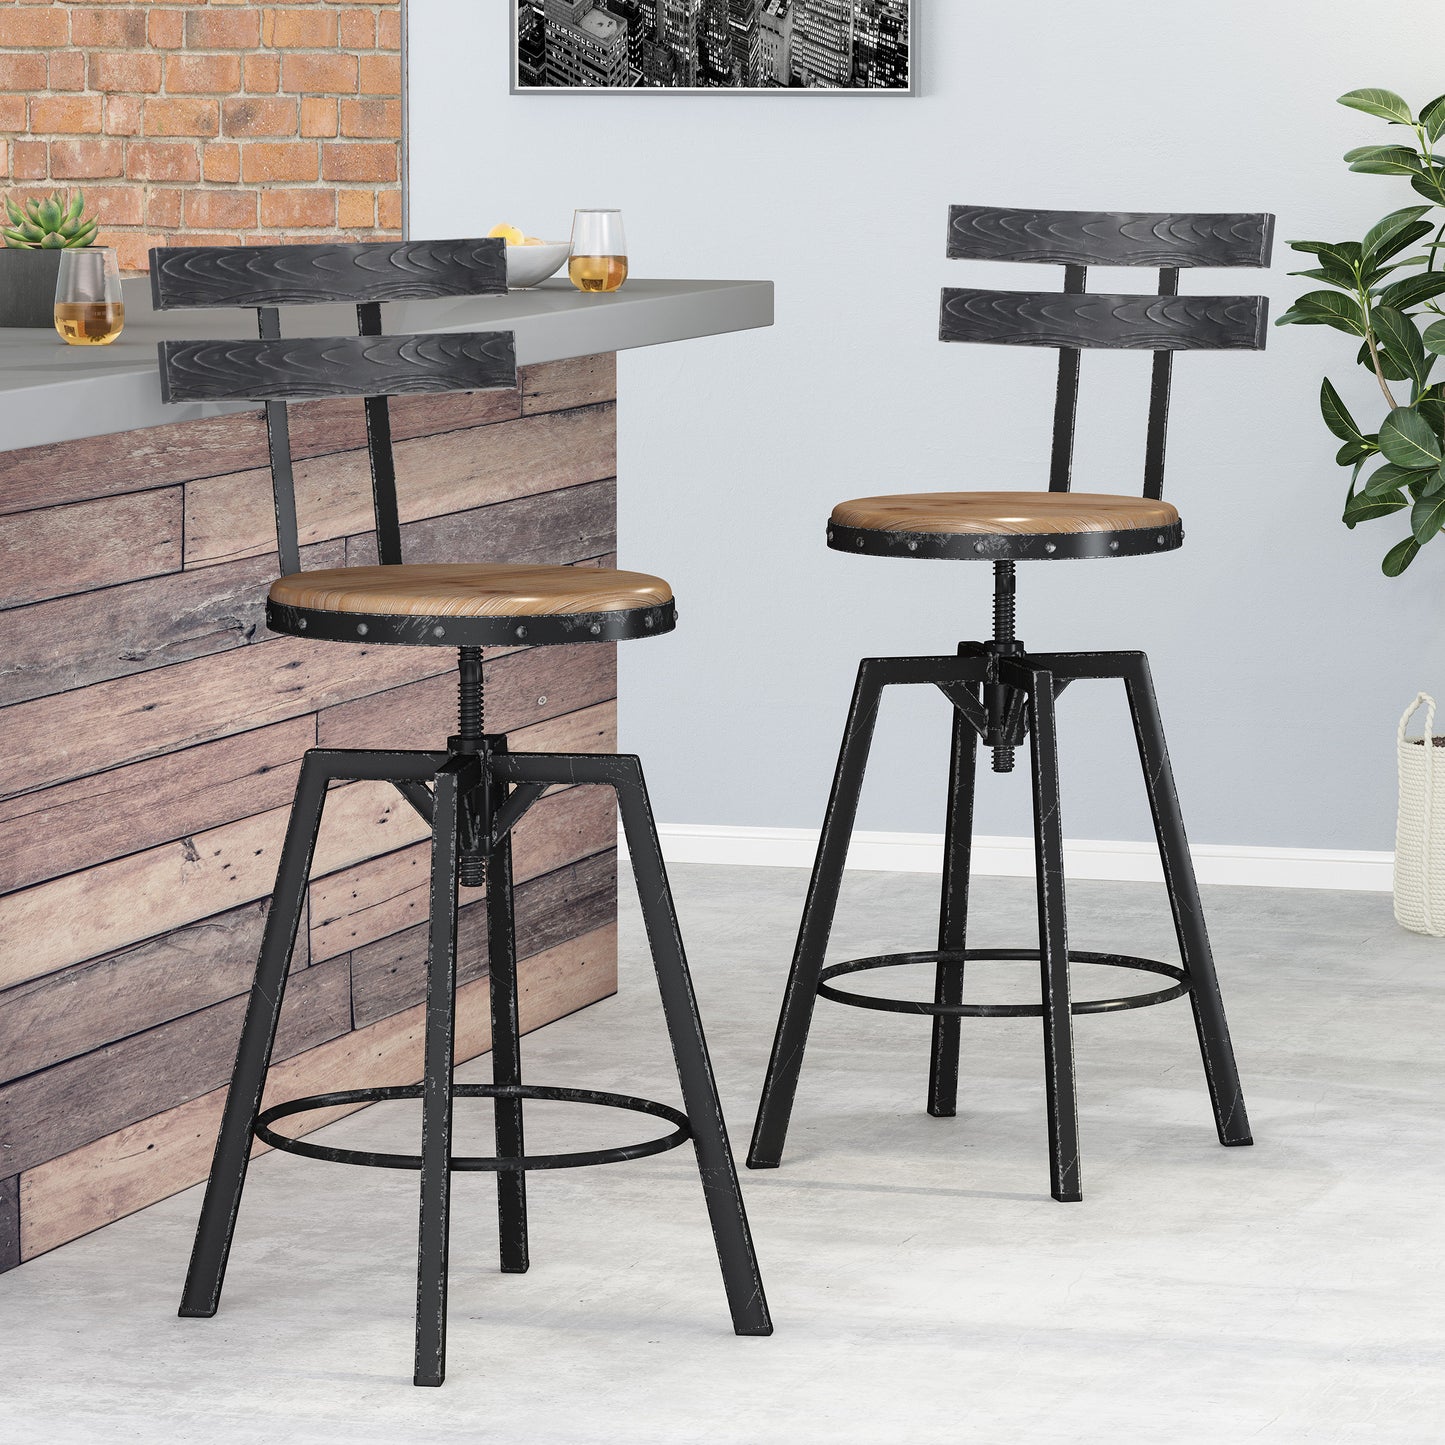 Theo Modern Industrial Firwood Adjustable Height Swivel Barstools, Set of 2, Natural and Black Brushed Silver